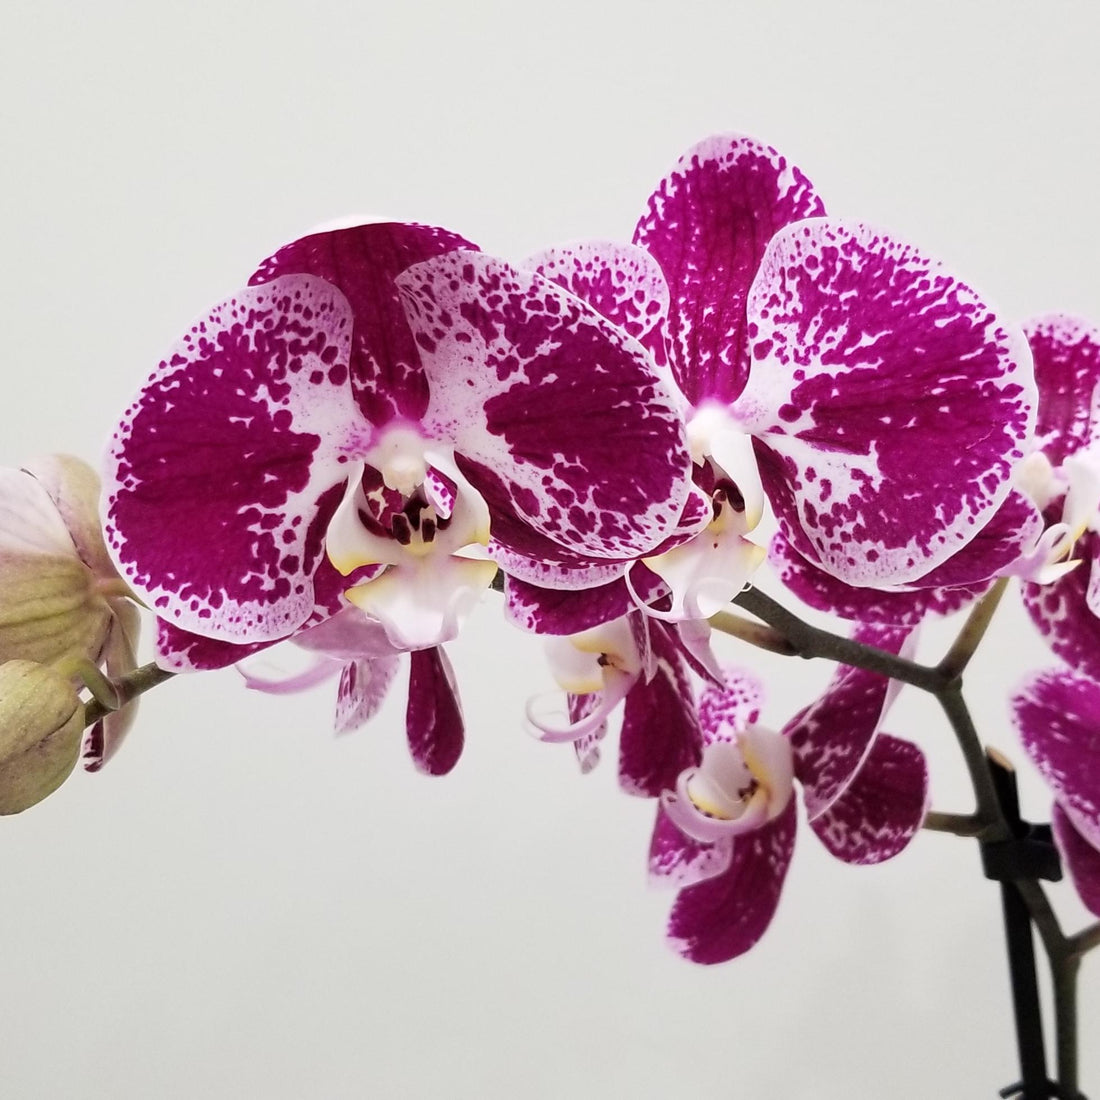 Create the perfect environment for your Magnifica Orchid to thrive with this step-by-step guide! Learn how to properly plant and care for these exquisite flowers here.